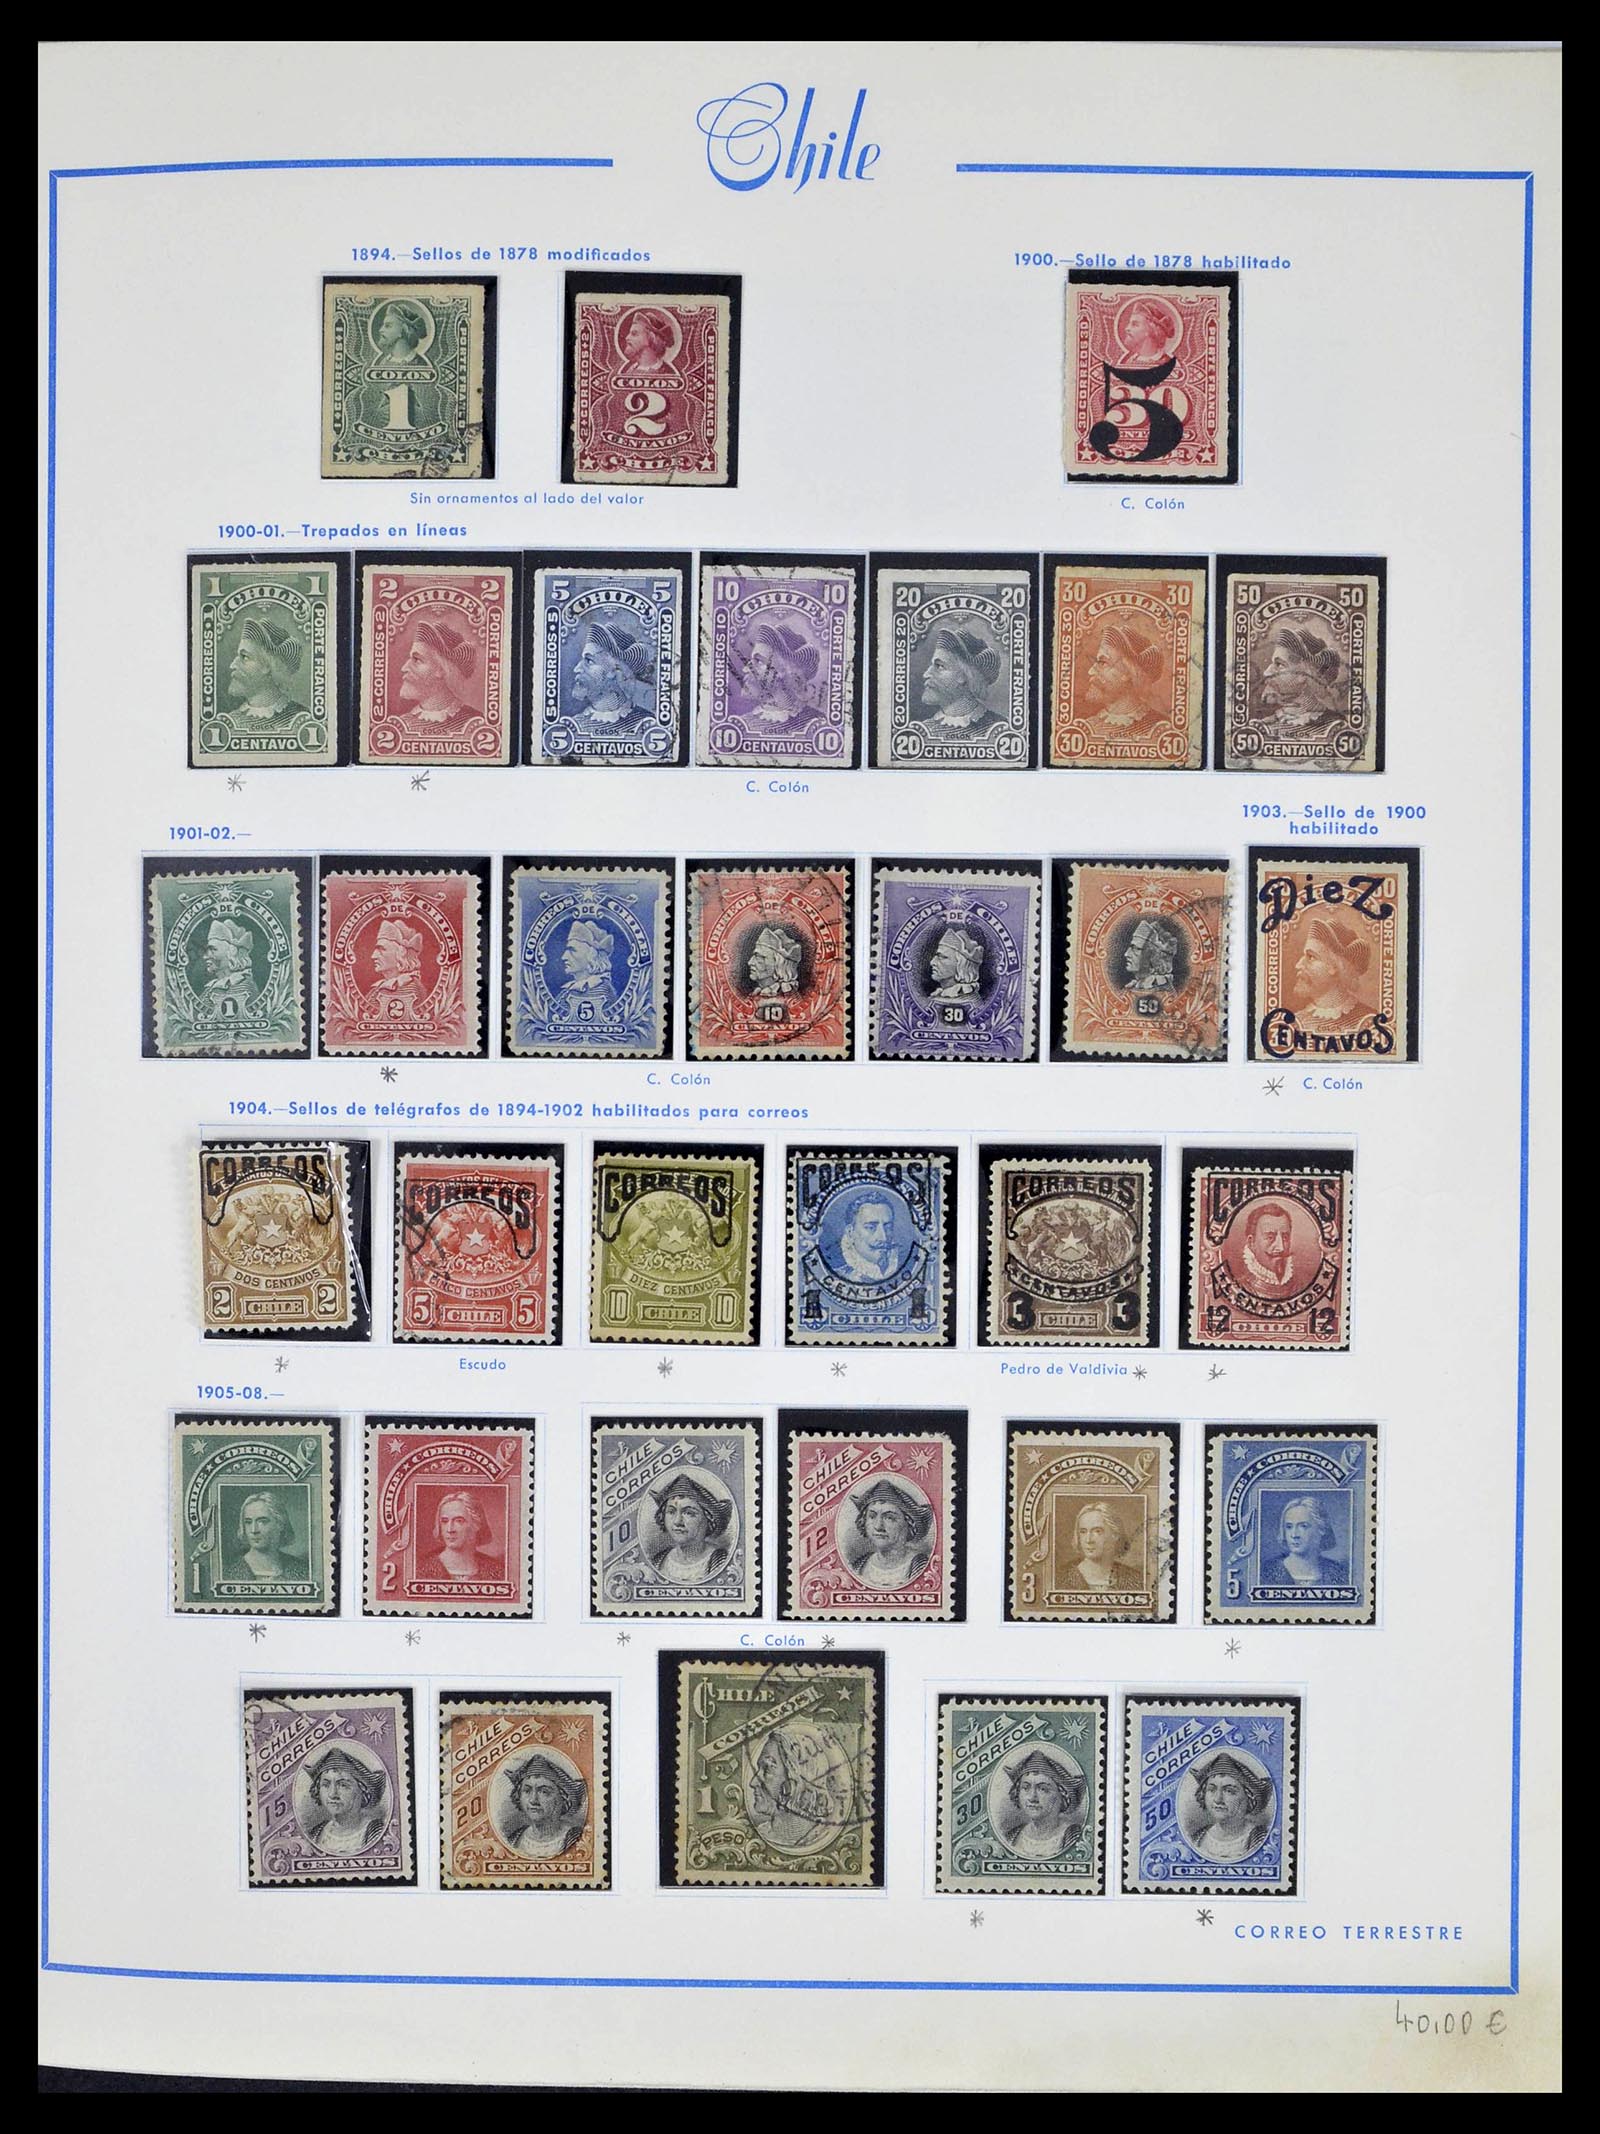 39213 0004 - Stamp collection 39213 Chile 1853-1970.